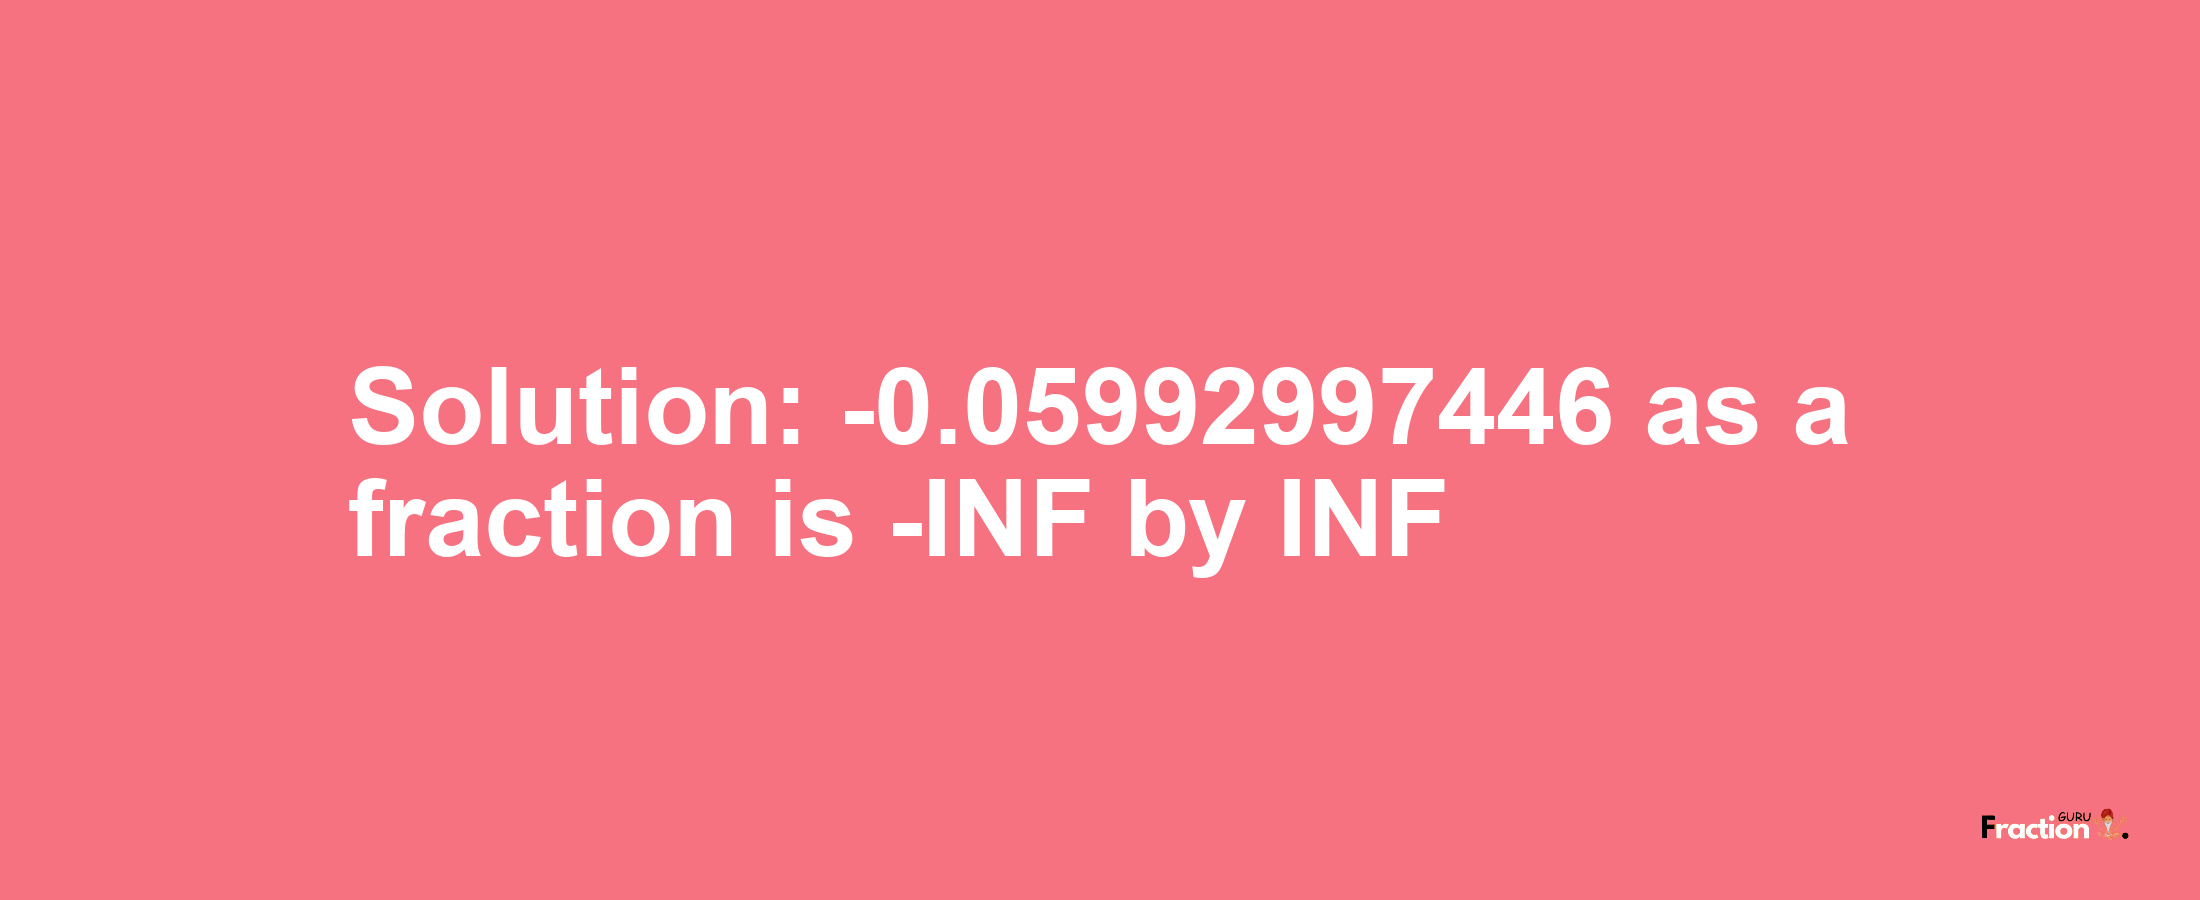 Solution:-0.05992997446 as a fraction is -INF/INF